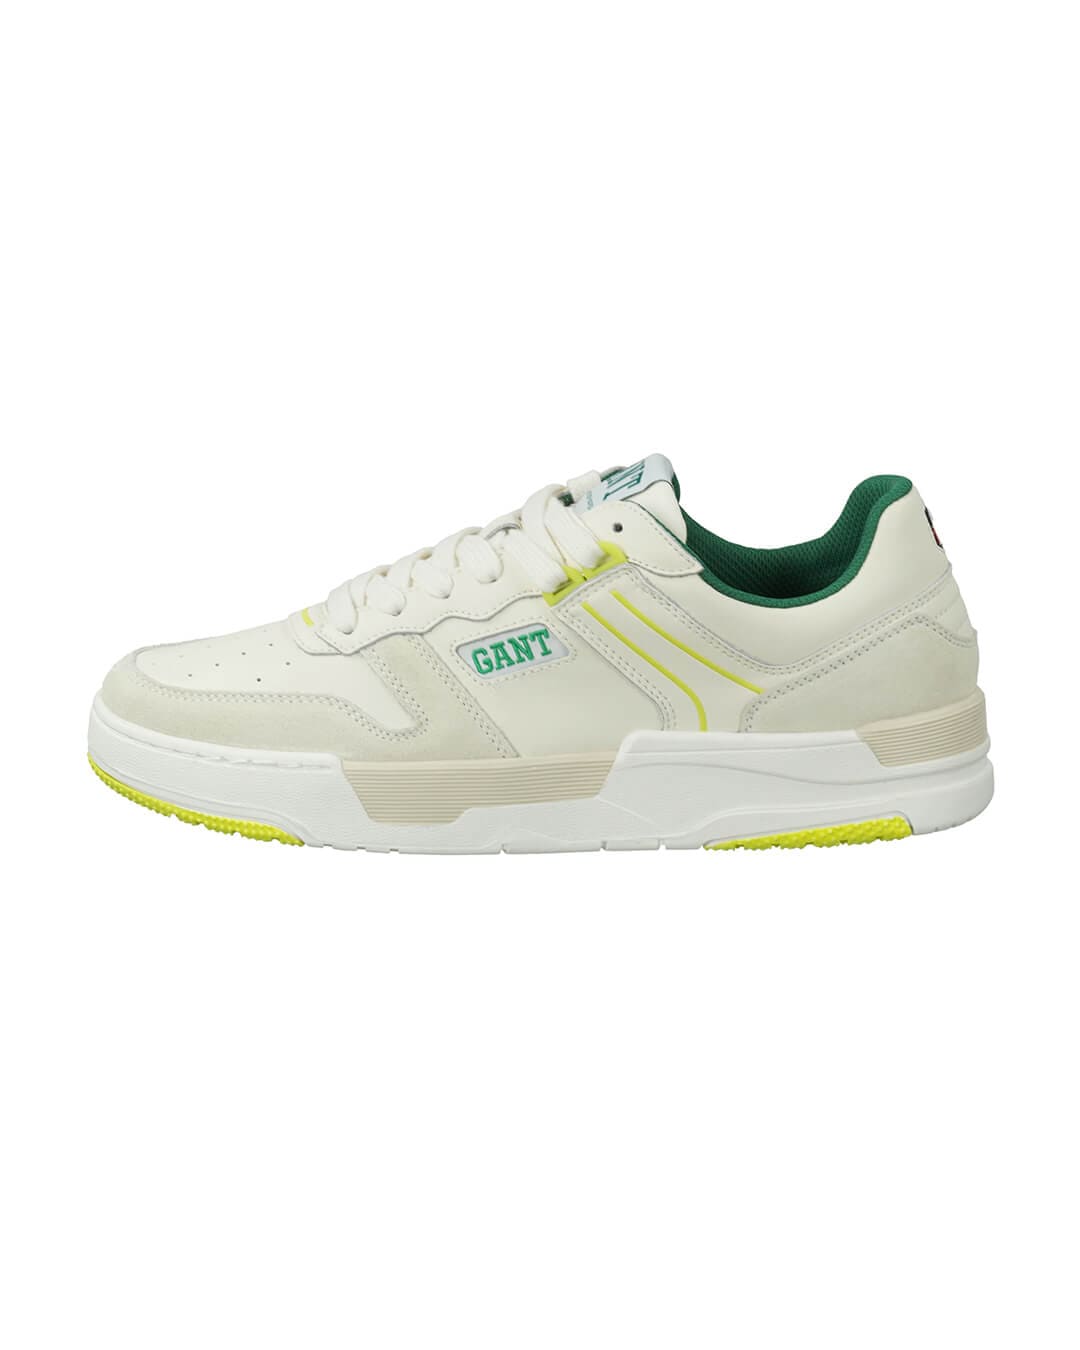 Gant Shoes Gant Brookpal Cream And Green Sneakers